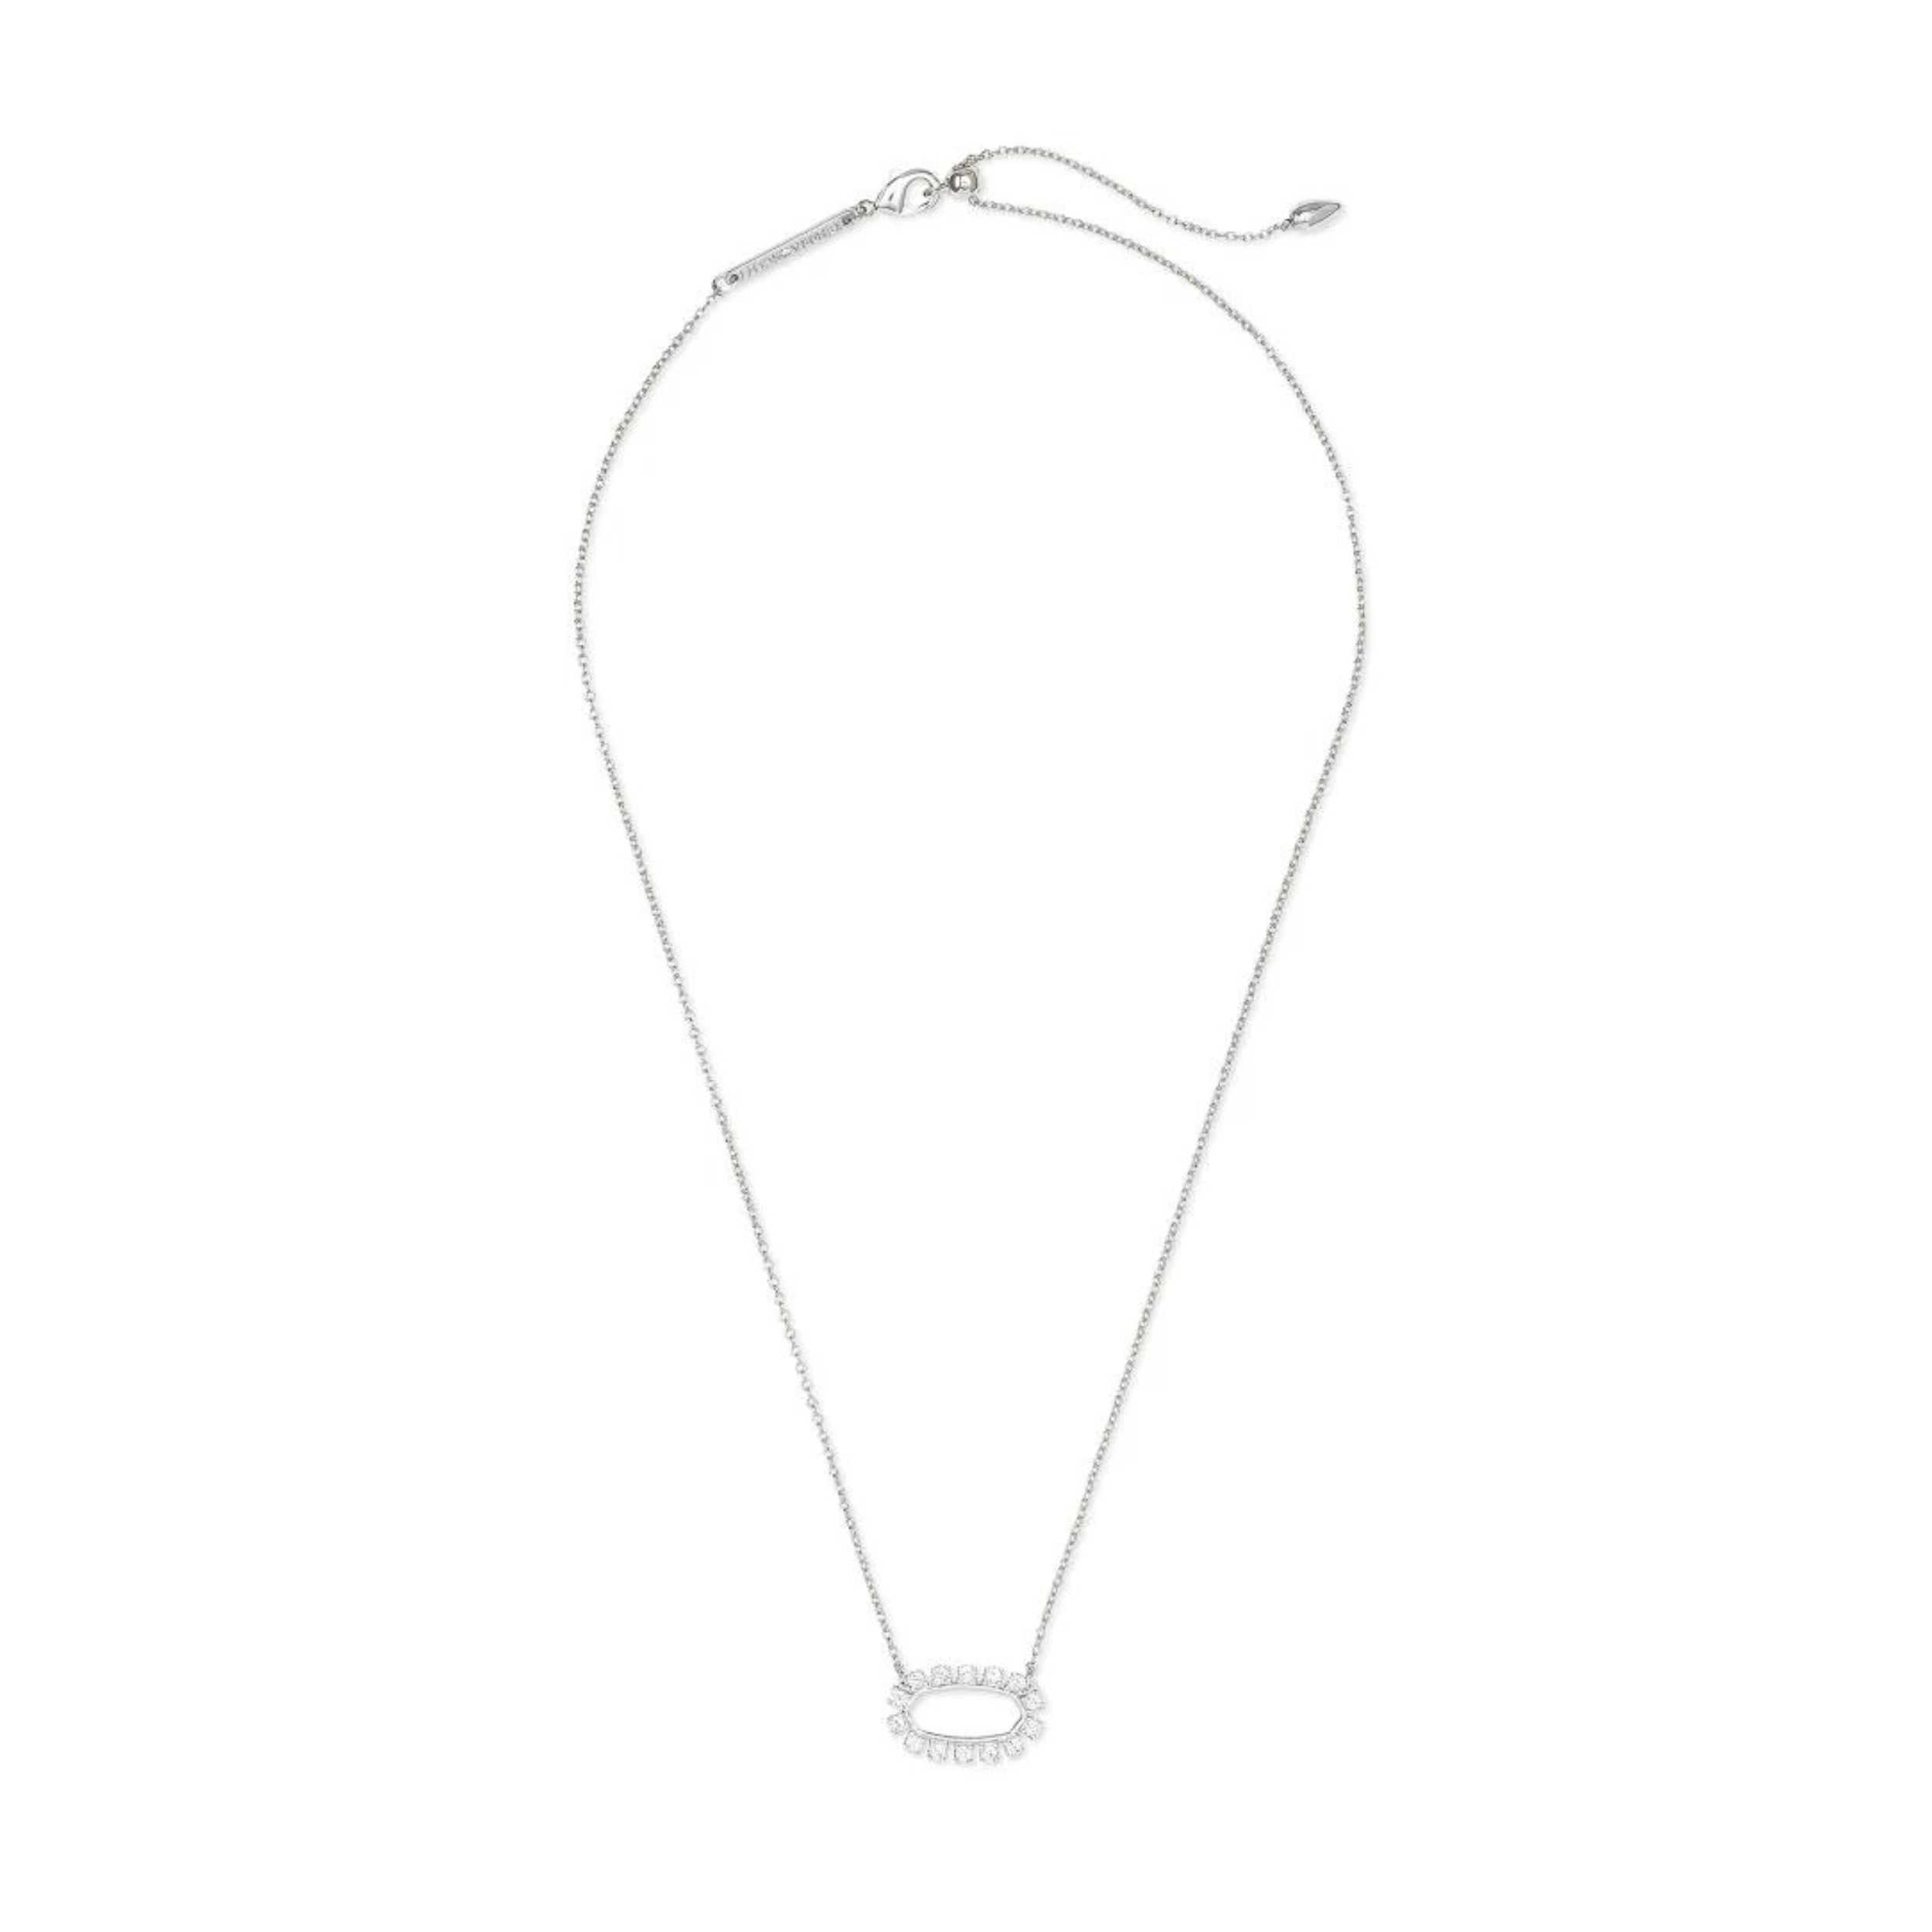 Kendra Scott | Elisa Open Frame Crystal Pendant Necklace in Silver - Giddy Up Glamour Boutique